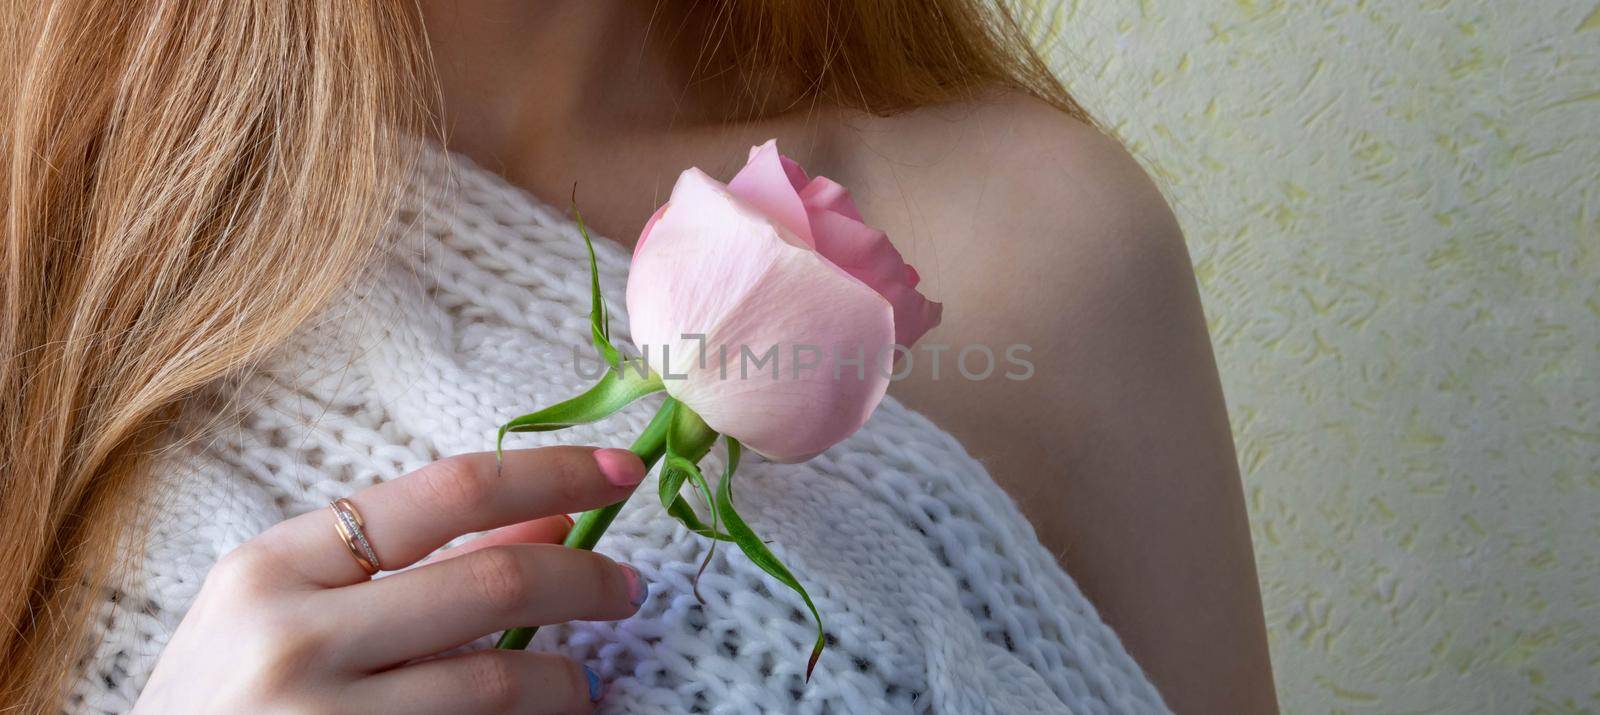 Hands of a young girl holding a pink rose.